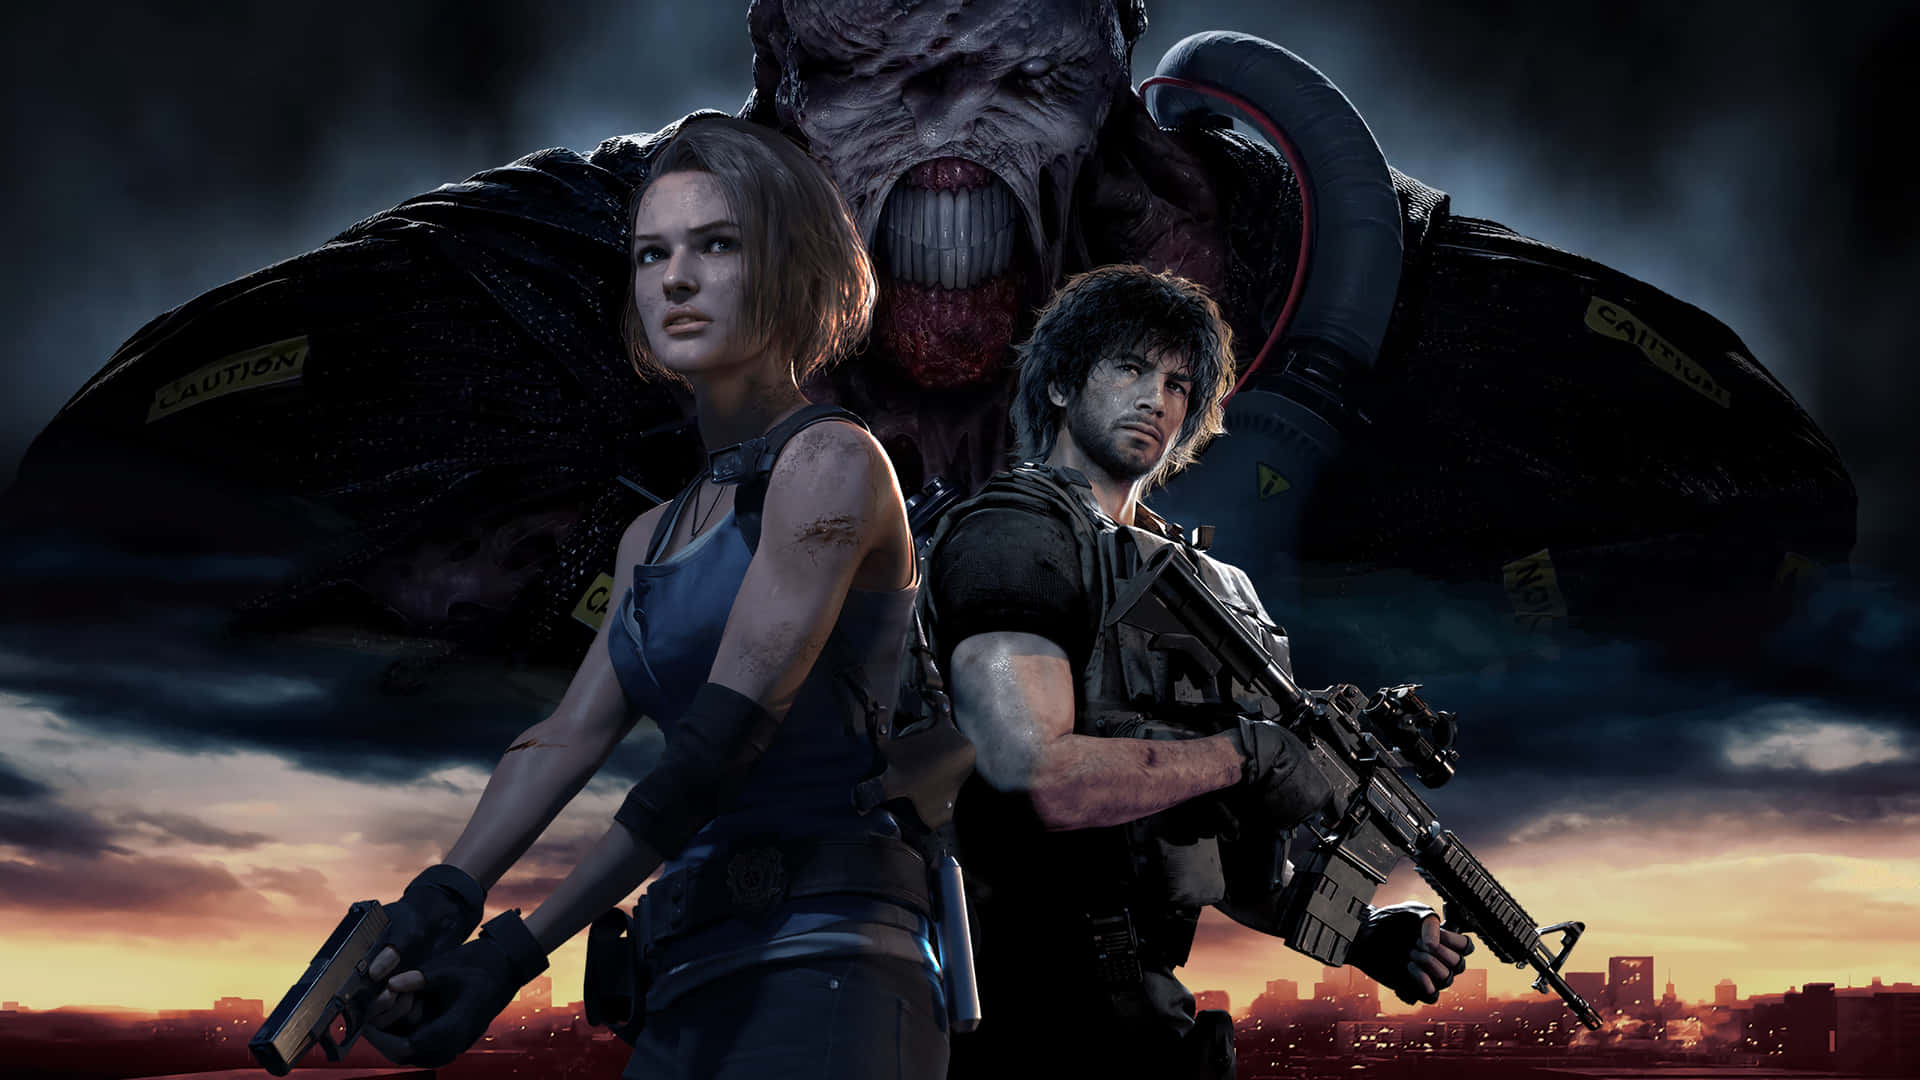 Zombies and Heroes Unite in Resident Evil